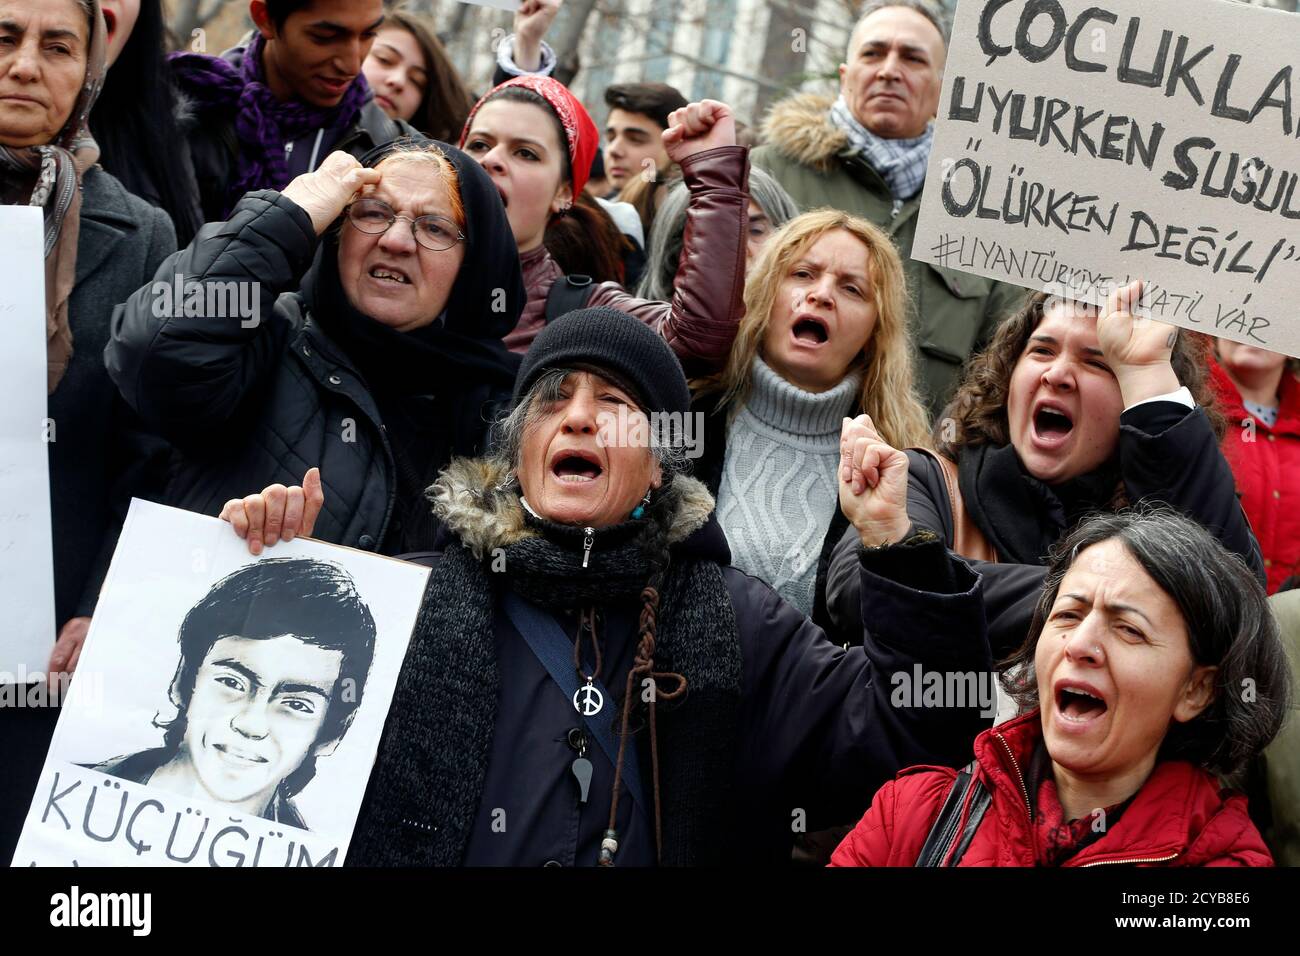 Anti-government protesters shout slogans during a demonstration marking the funeral of Berkin Elvan in Ankara March 12, 2014. Several thousand mourners gathered in central Istanbul and Ankara on Wednesday for the funeral of Elvan, a 15-year-old boy wounded during anti-government demonstrations last summer whose death on Tuesday triggered protests across Turkey. REUTERS/Umit Bektas (TURKEY  - Tags: POLITICS CIVIL UNREST) Stock Photo